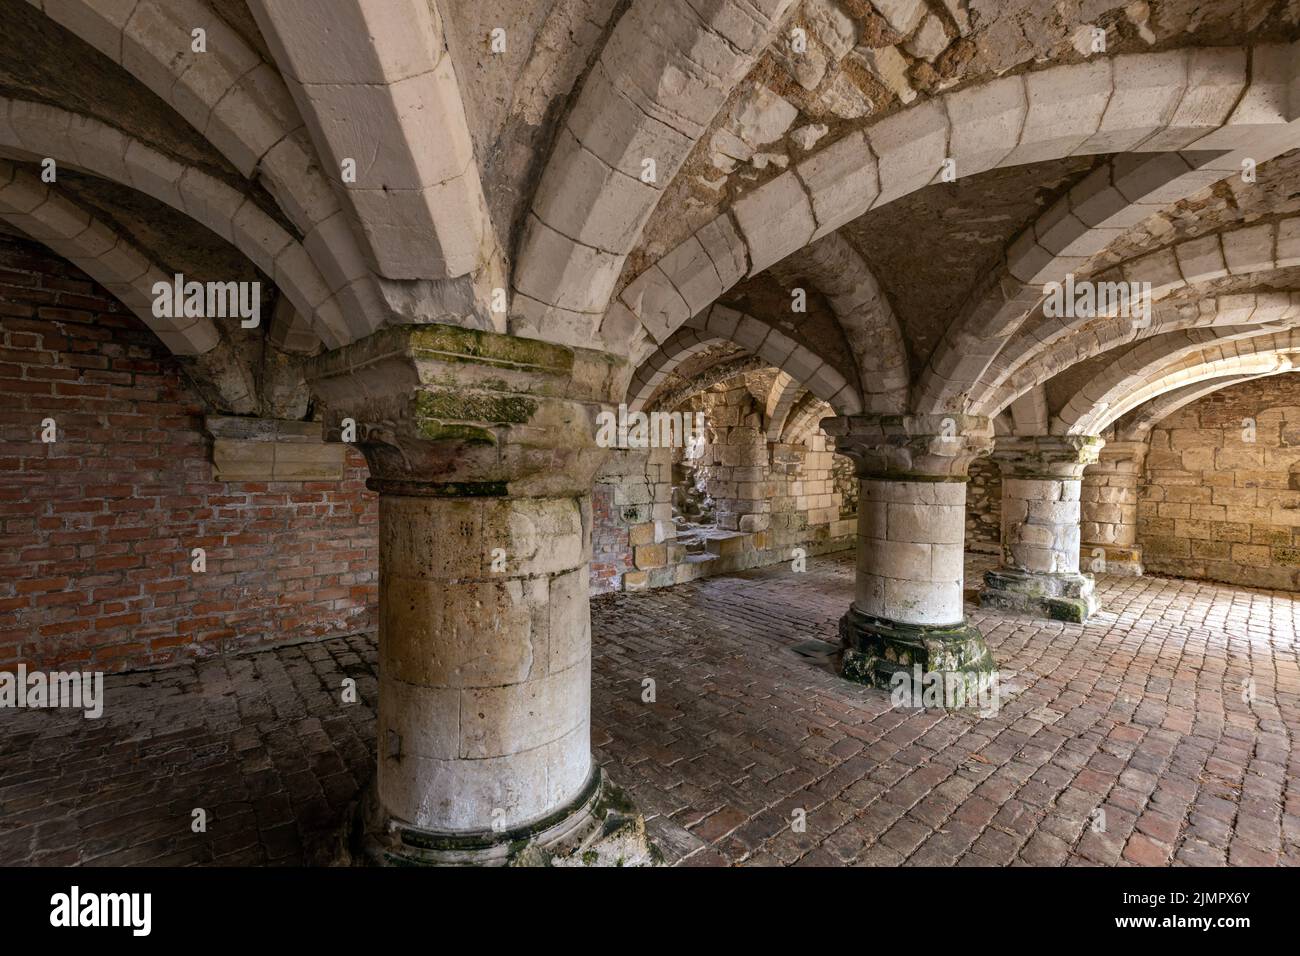 The Undercroft of the old Norman Manor House at Burton Agnes Hall, a 17th century Elizabethan manor house in the East Riding of Yorkshire, England. Stock Photo